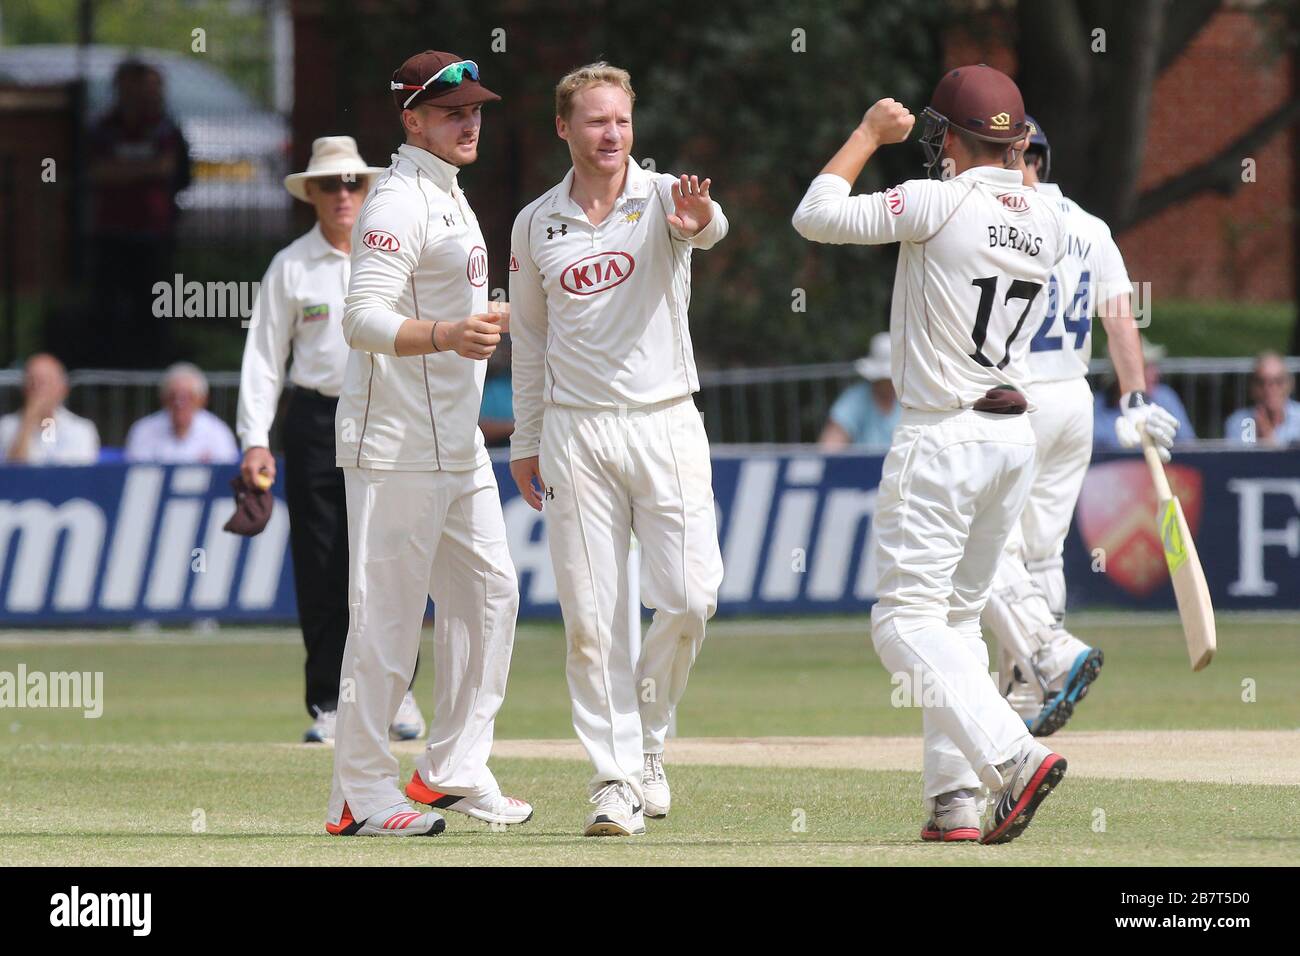 Gareth Batty of Surrey CCC (C) claims the wicket of Tom Westley Stock Photo